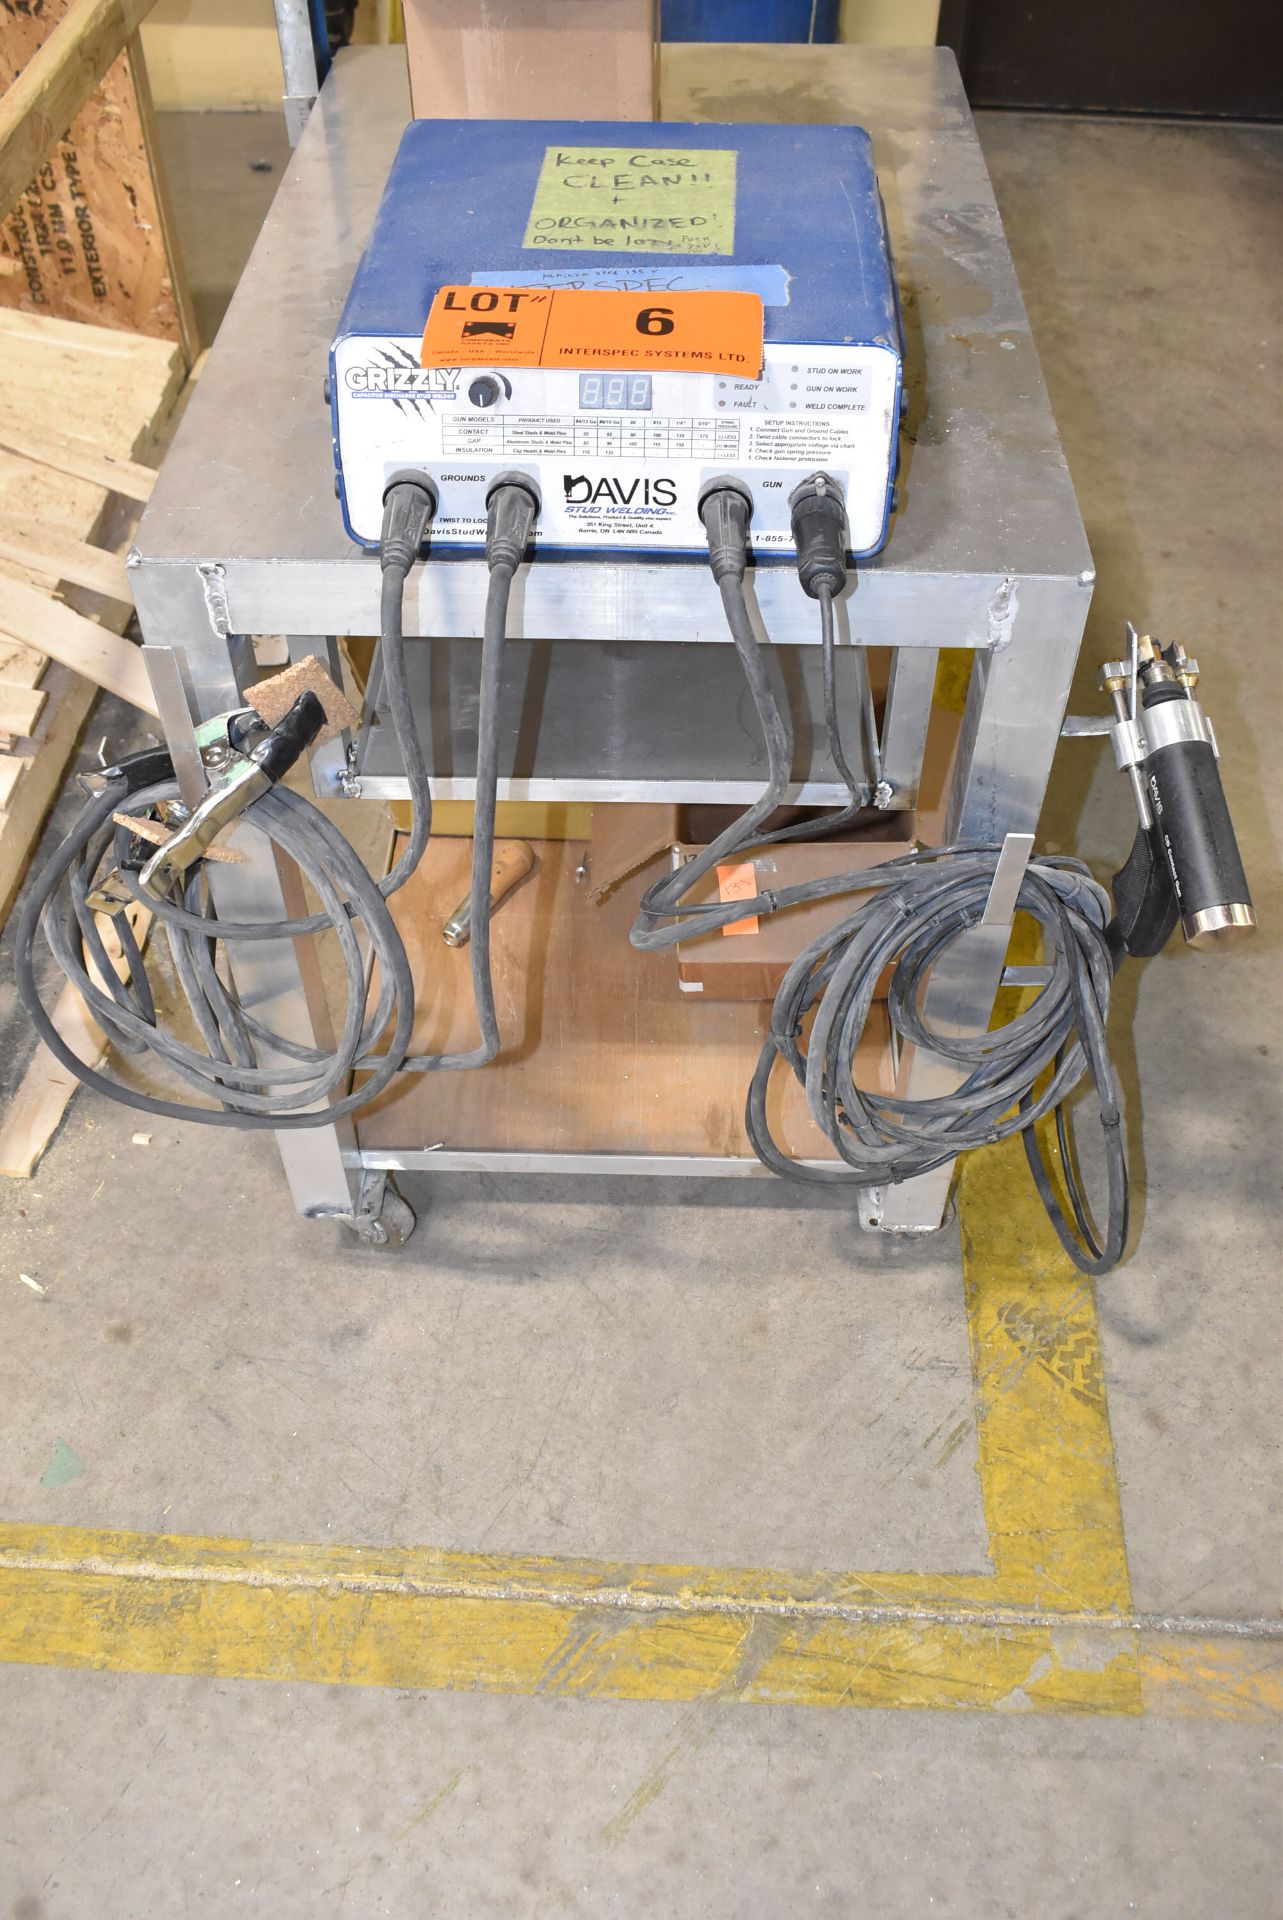 DAVIS (2016) GRIZZLY PRO CAPACITOR DISCHARGE STUD WELDER WITH CABLES AND GUN, S/N M1611024 [